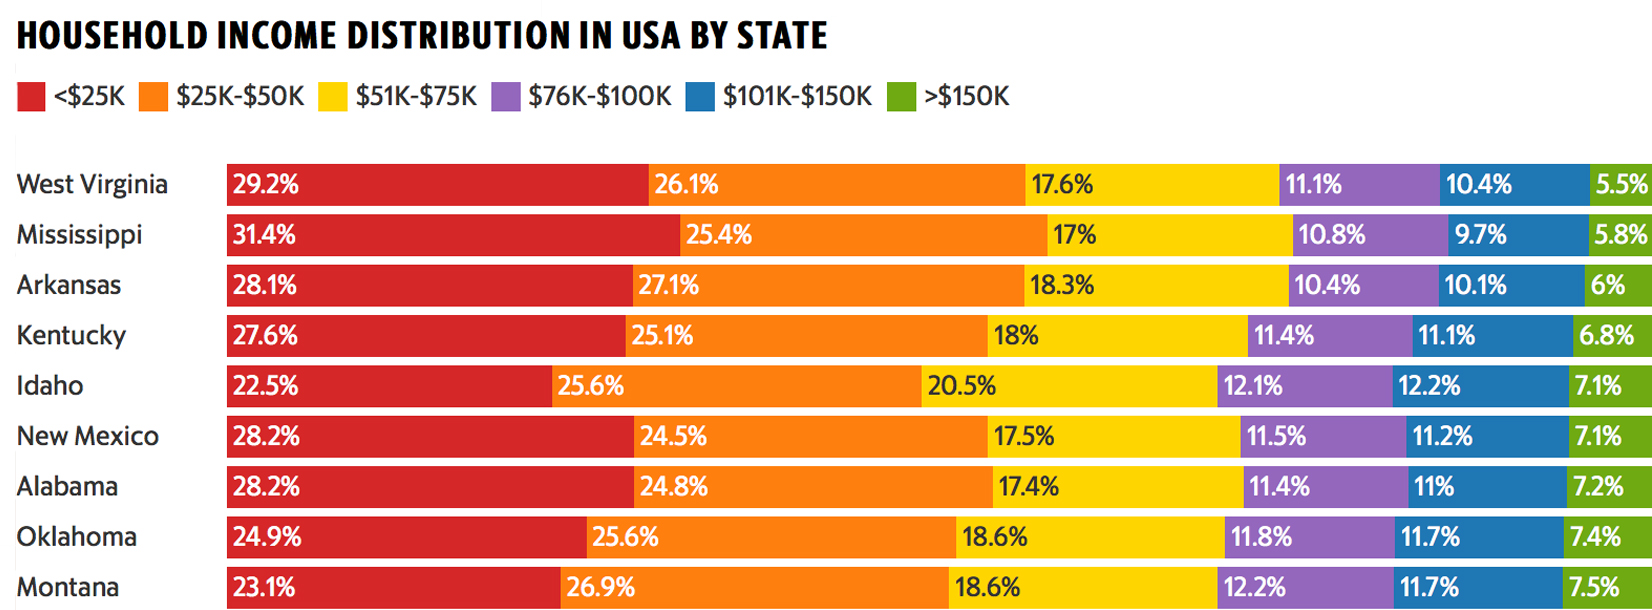 Visualizing Household Income Distribution in the U.S. by State